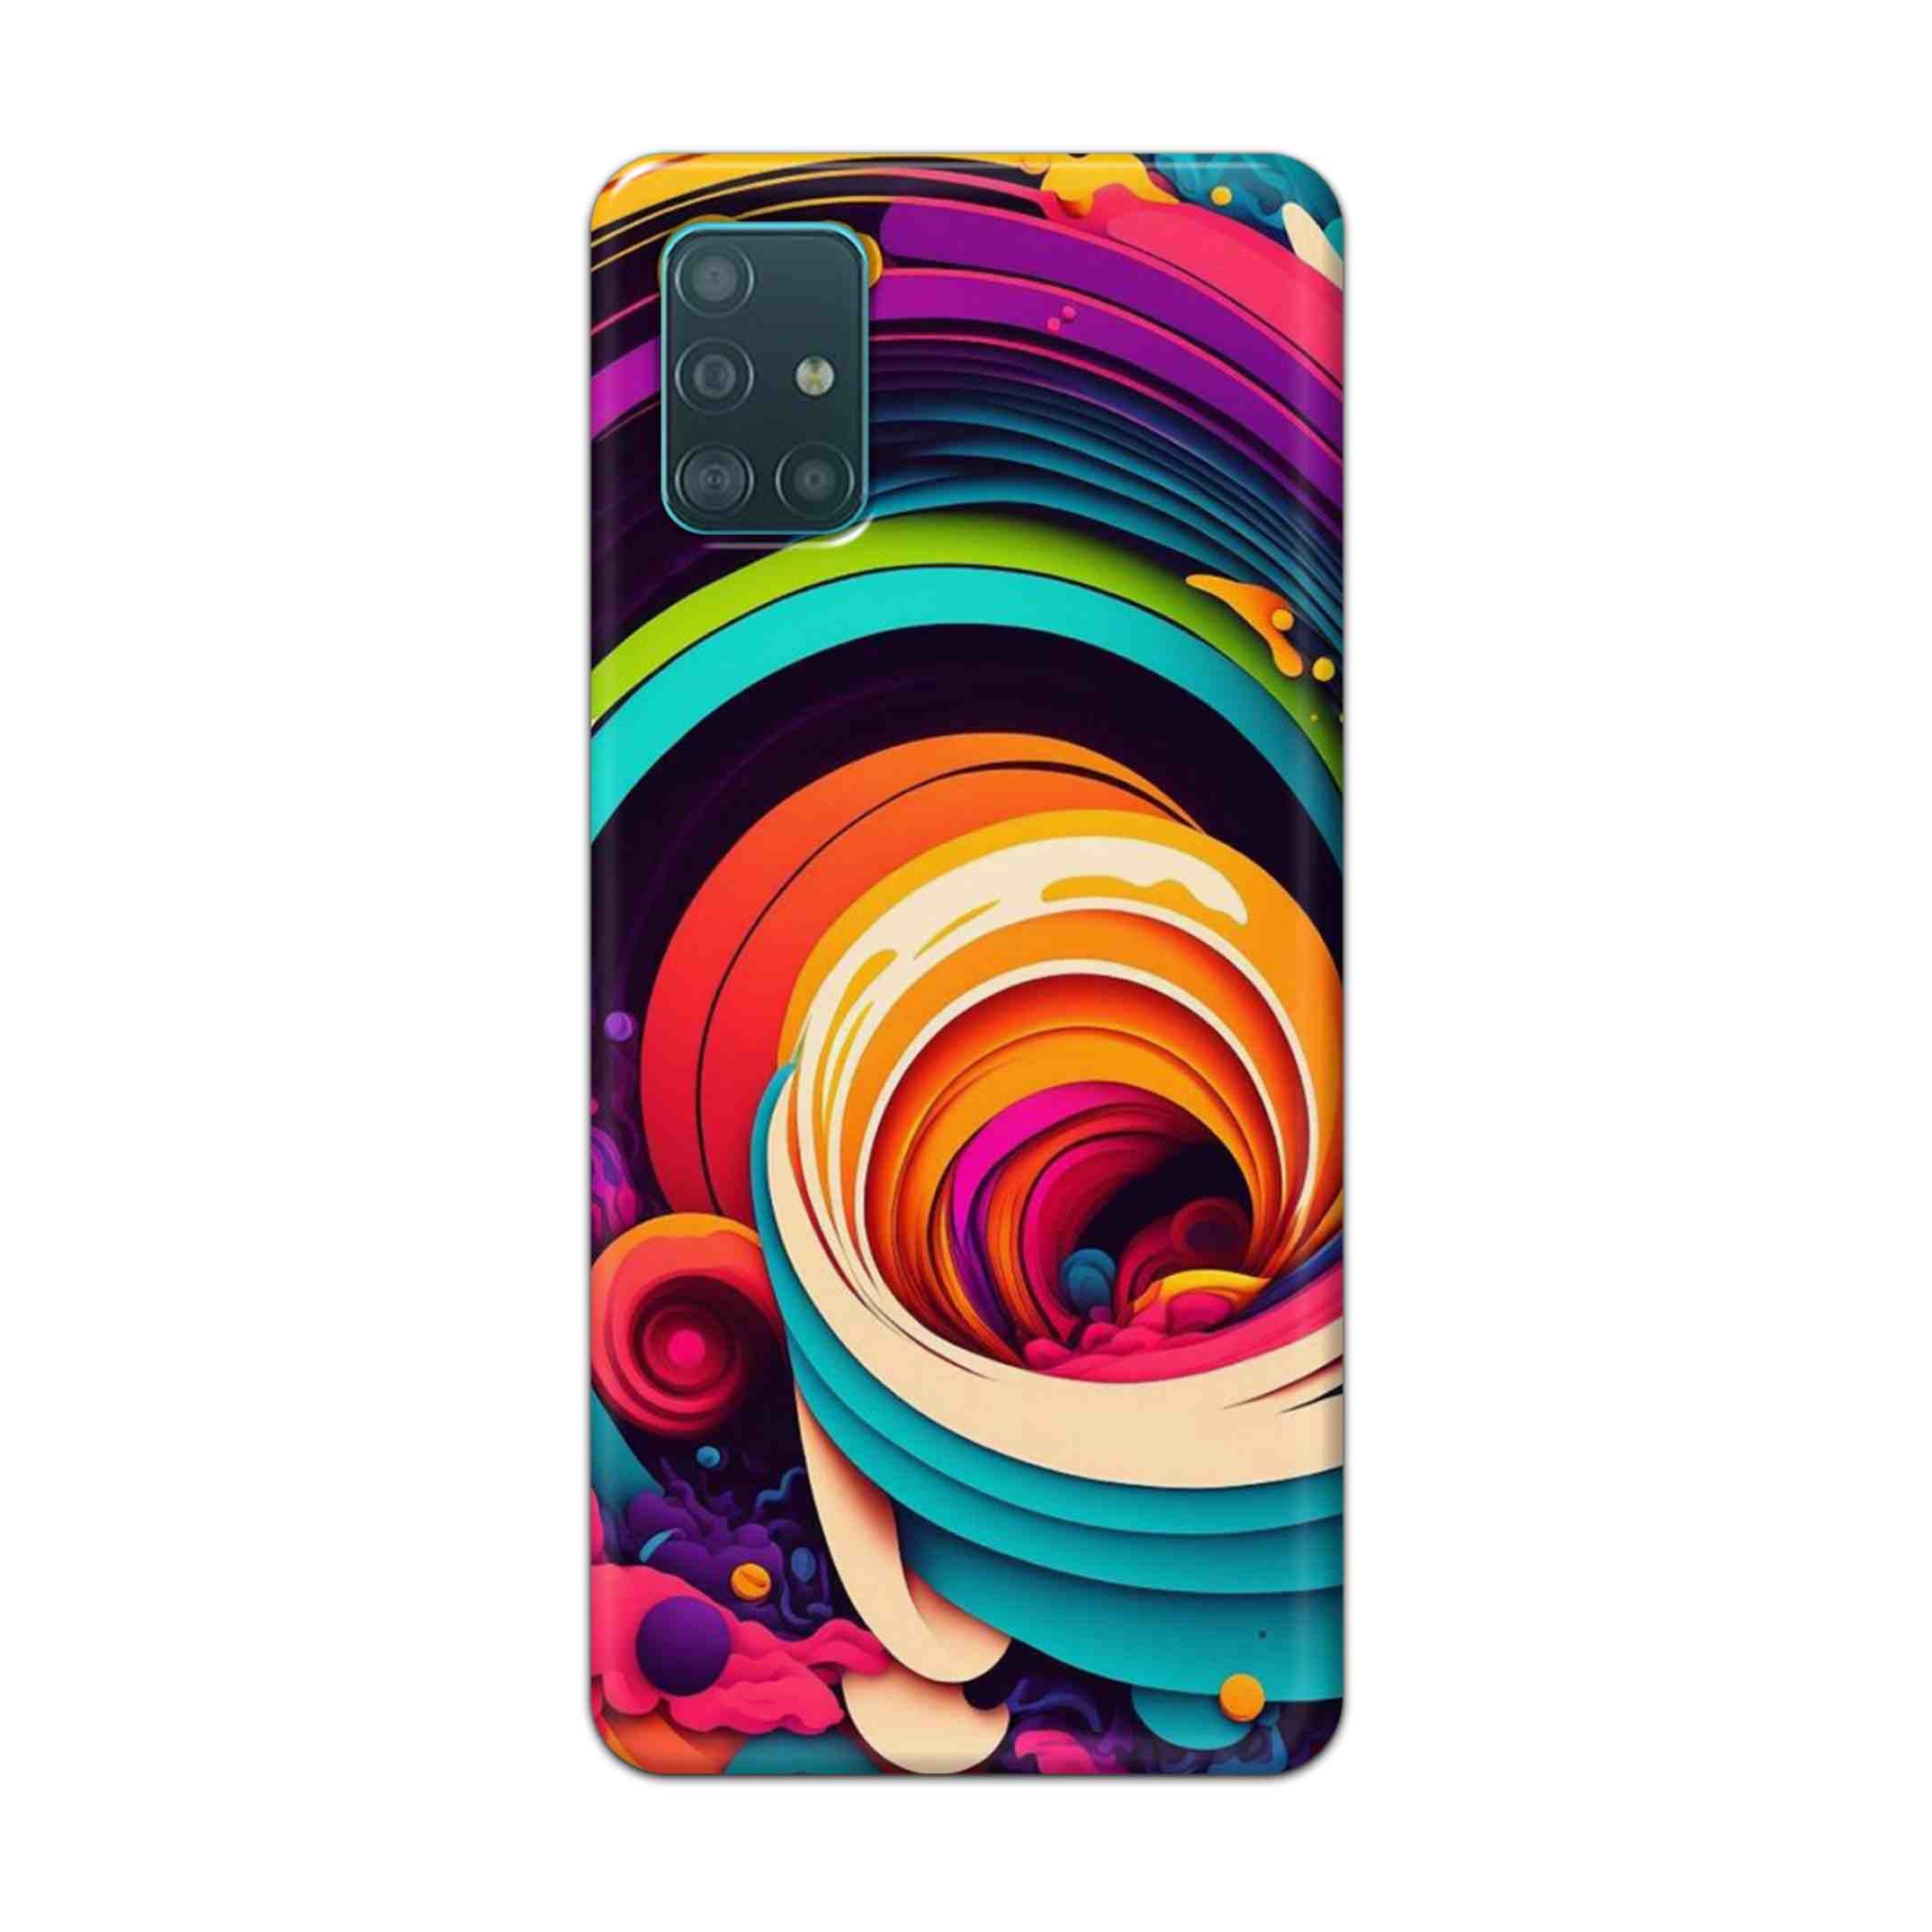 Buy Colour Circle Hard Back Mobile Phone Case Cover For Samsung A51 Online